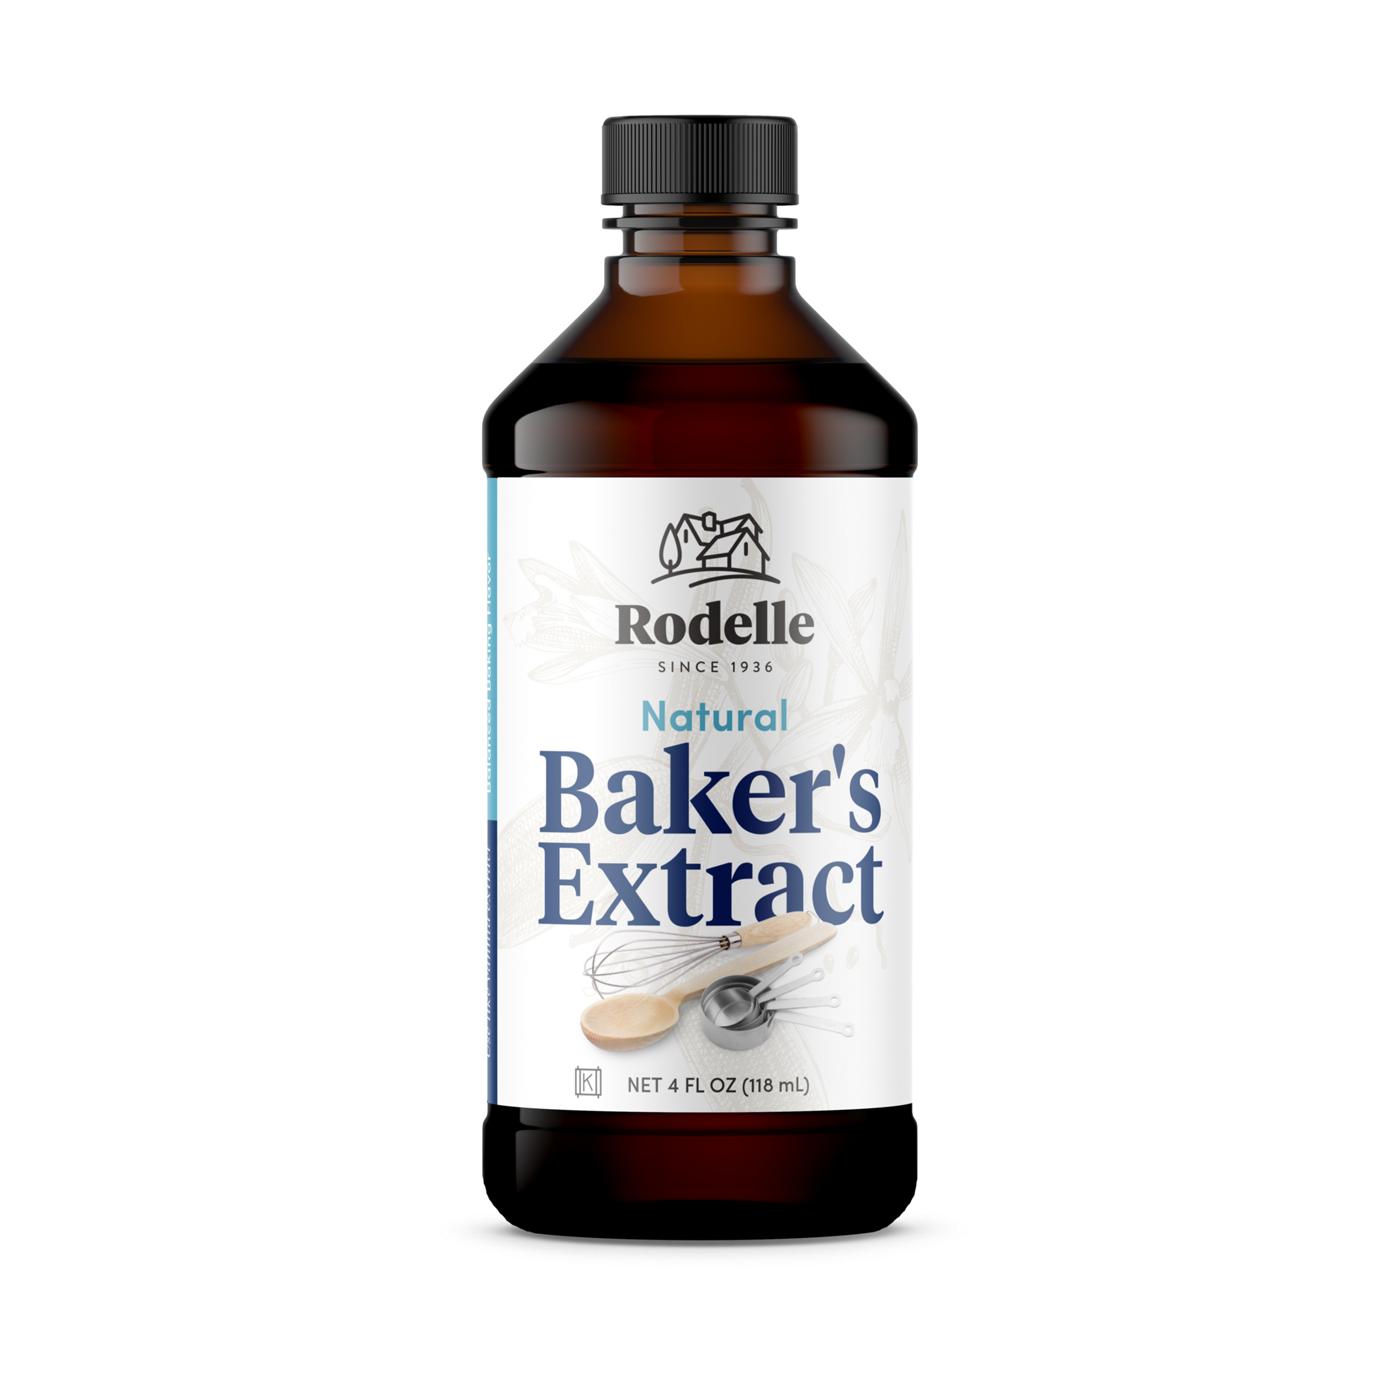 Rodelle Natural Baker's Extract; image 1 of 4